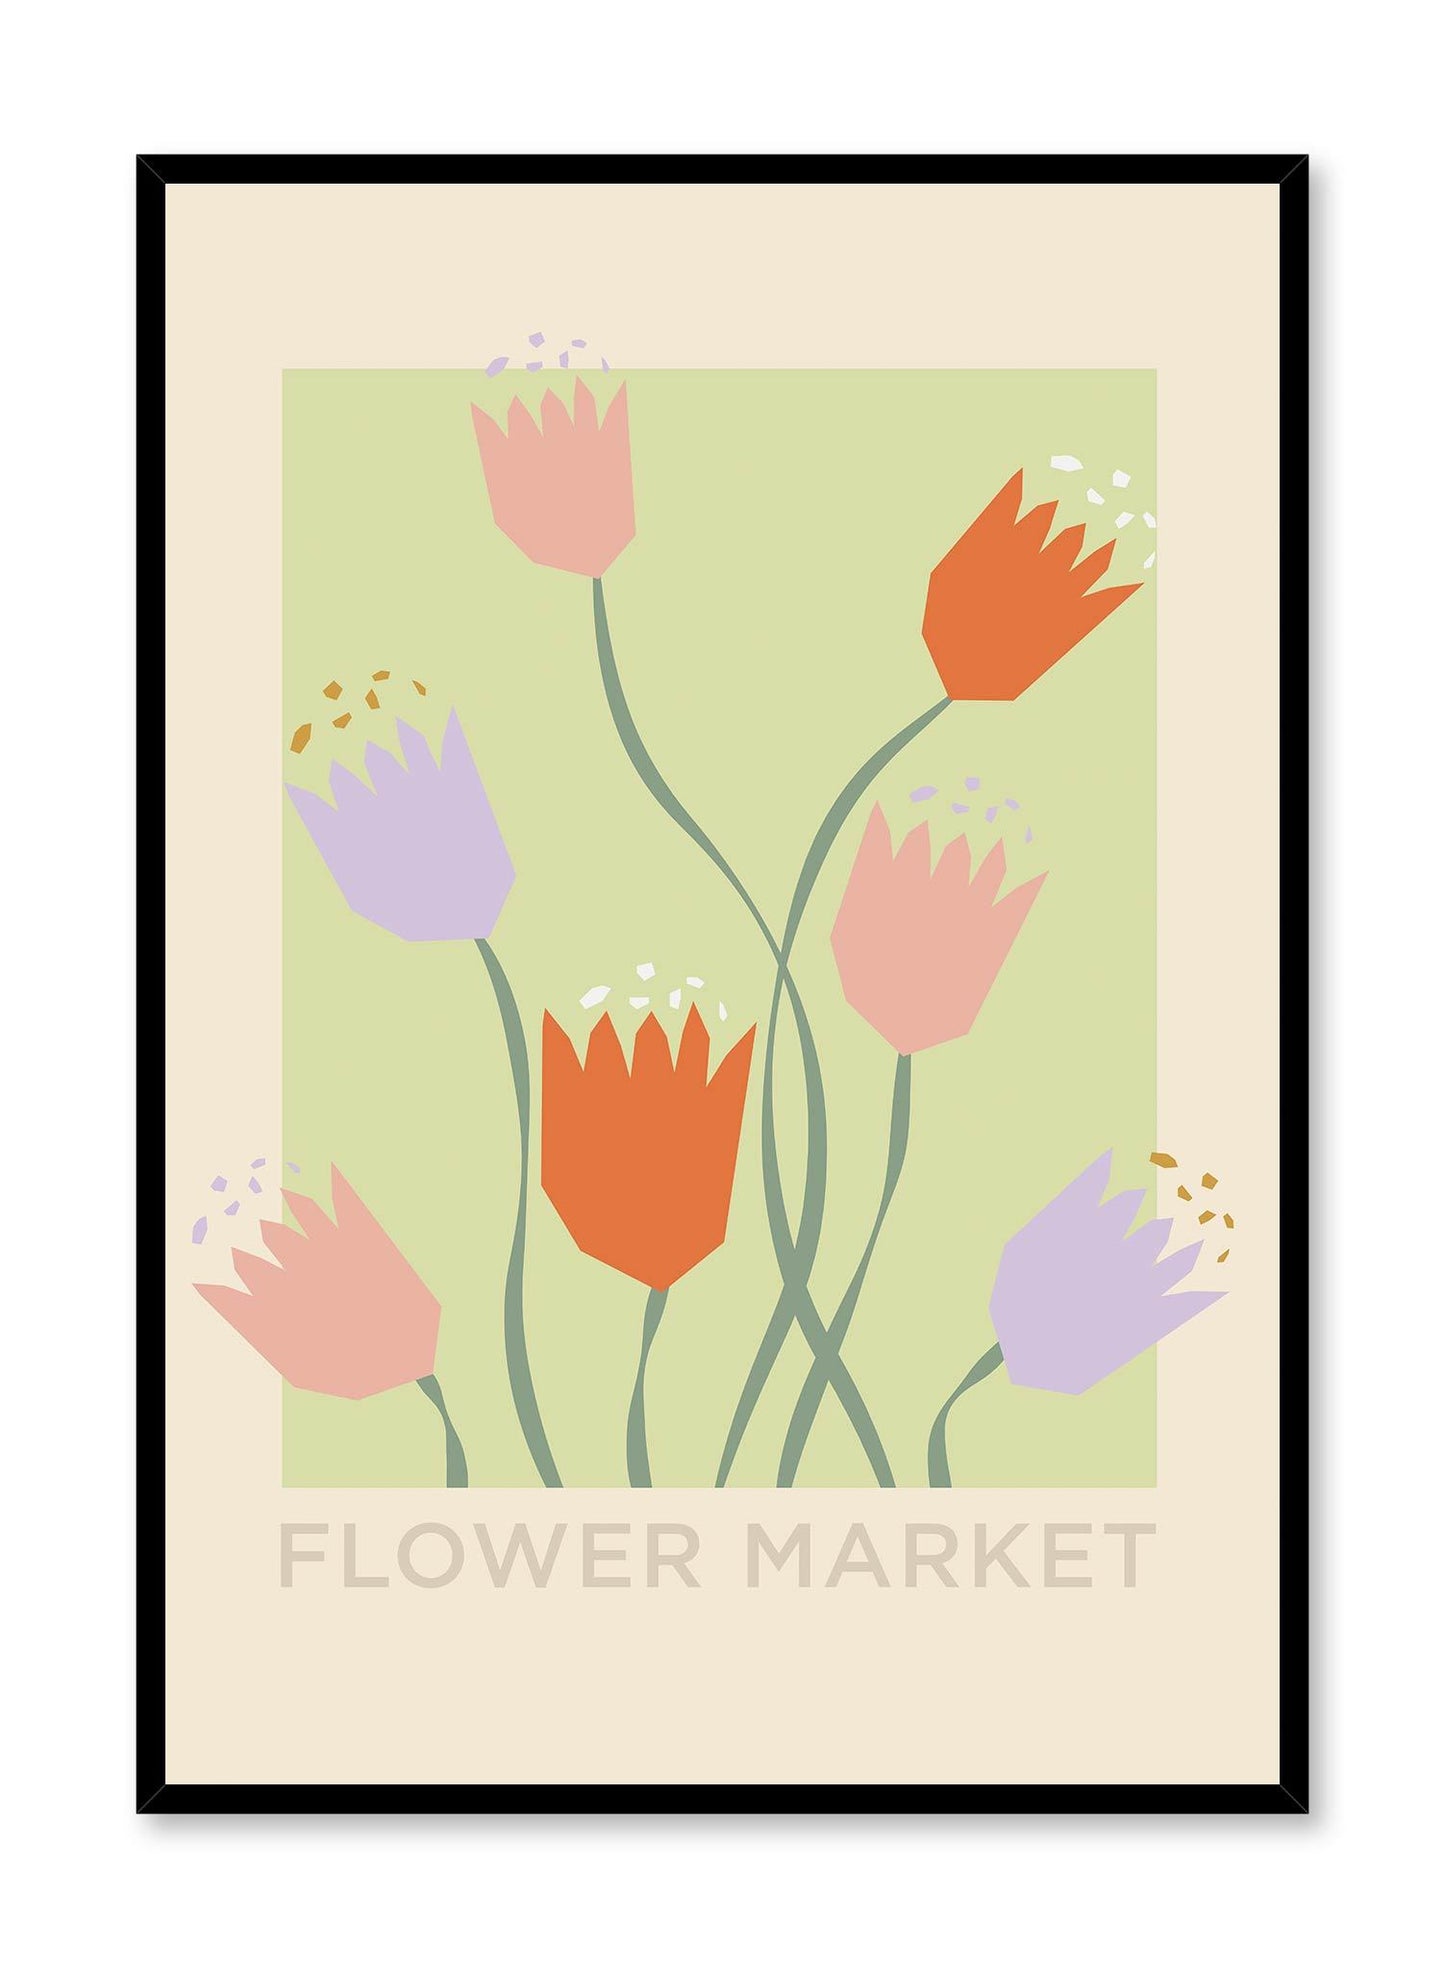 Flower Market is a vector illustration of a patch of colourful and pretty tulips by Opposite Wall.